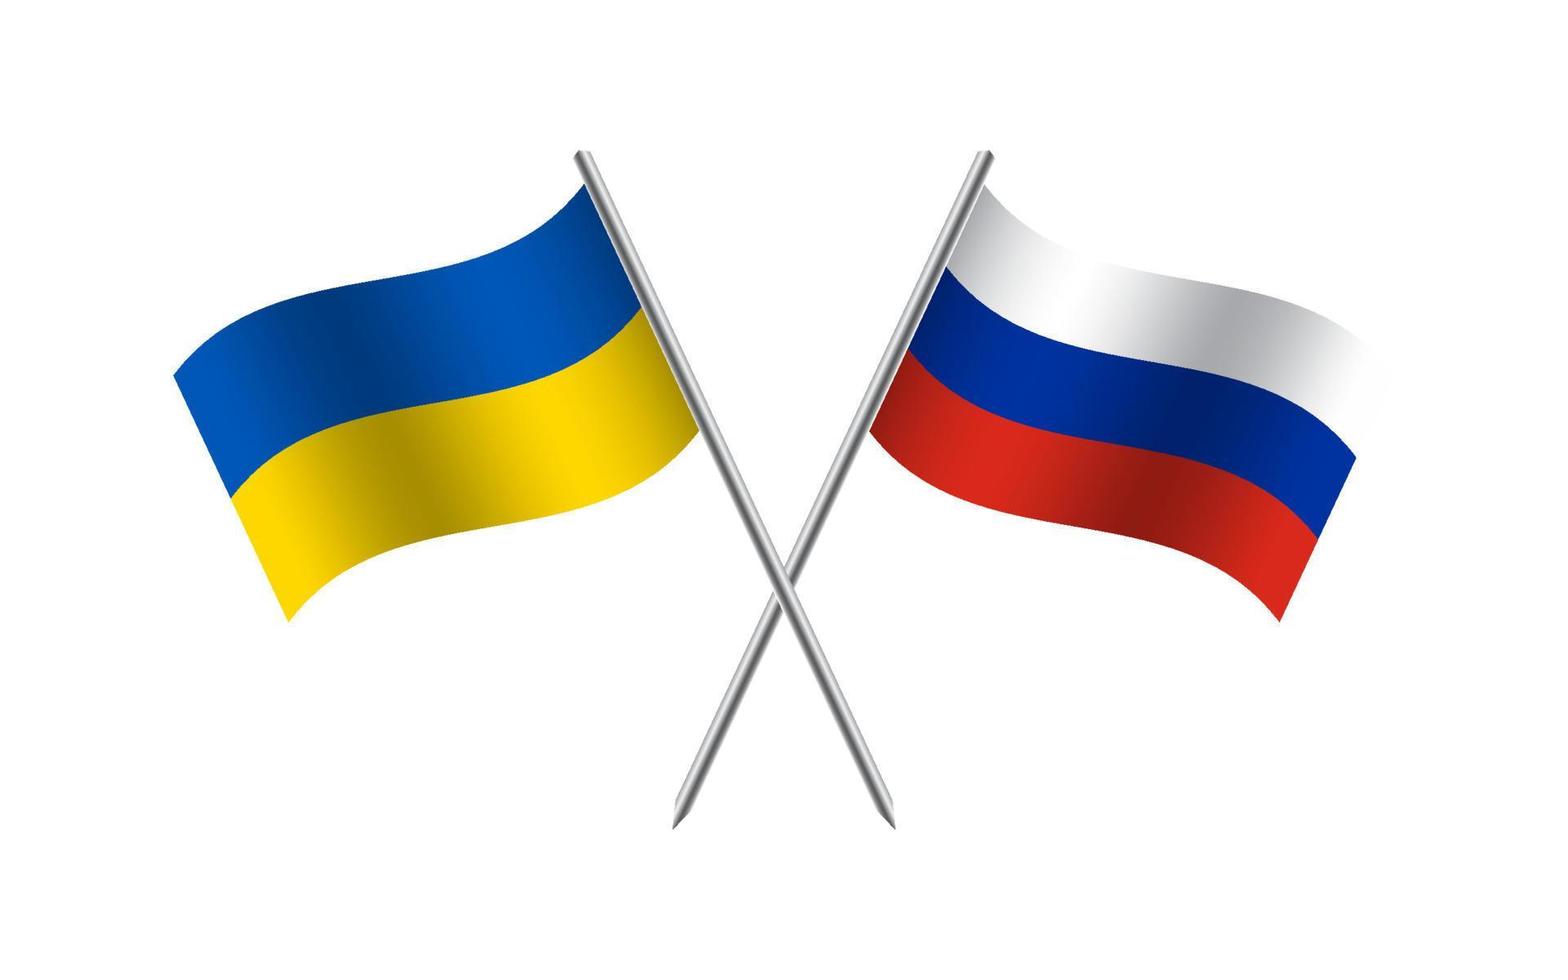 Flying flags of Ukraine and Russia. Ukrainian and Russian state symbol. Ukrainian symbol of independence and freedom. Vector illustration